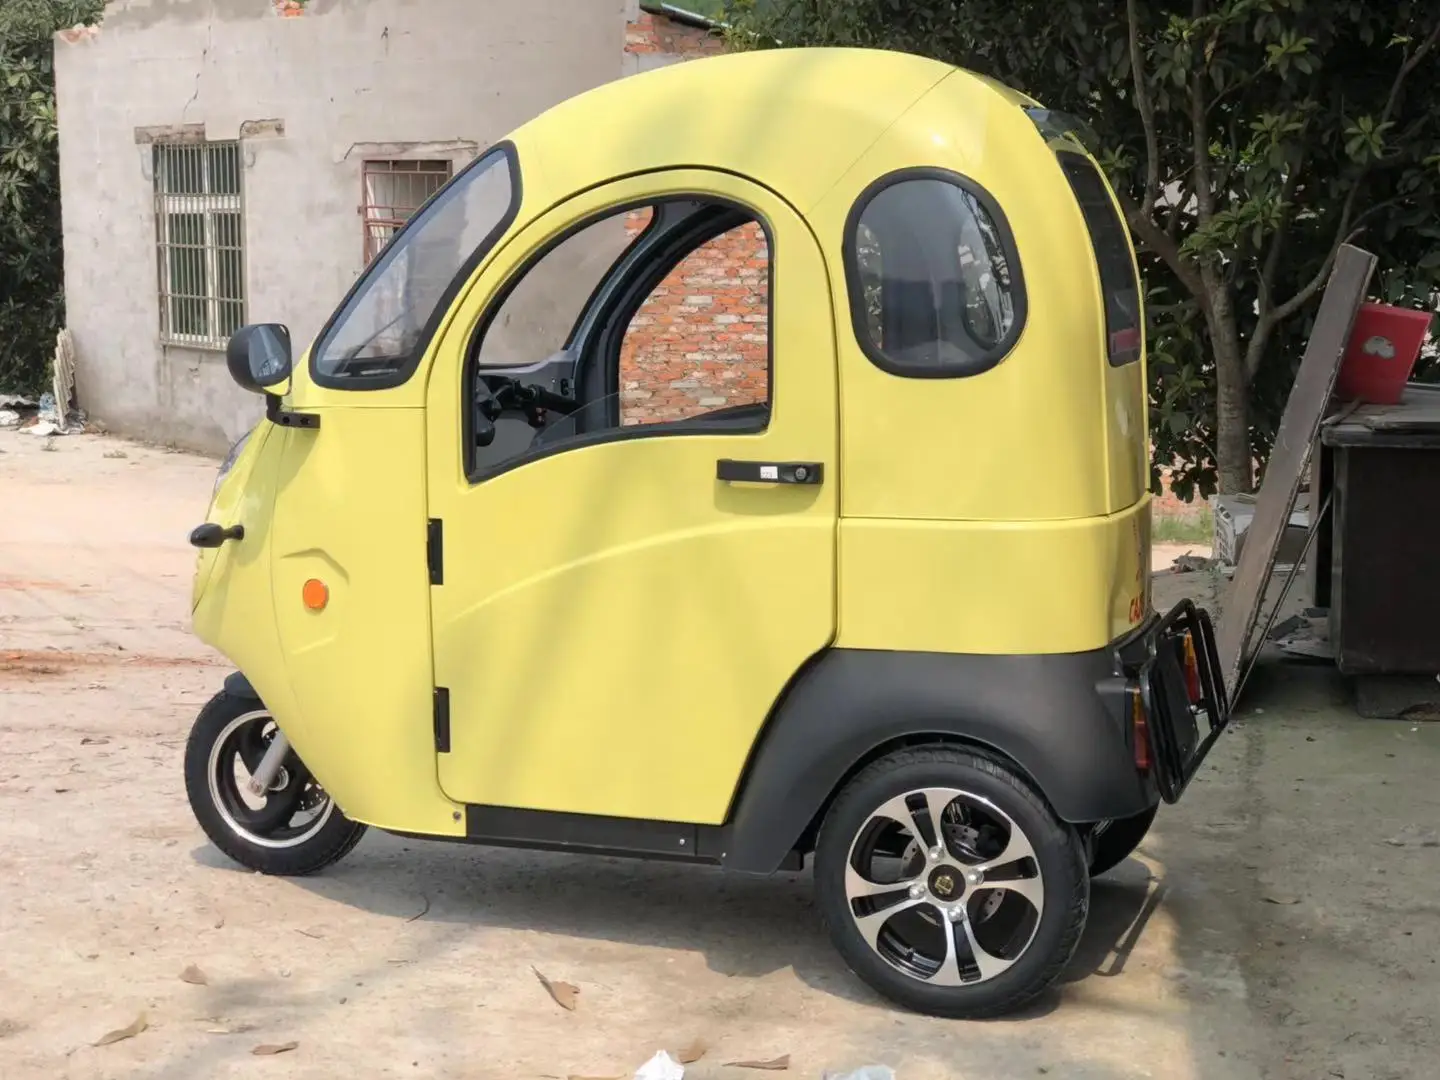 Everbright 60v800w Eec Cheap Electric Adult Car 3 Wheel Tricycle Car